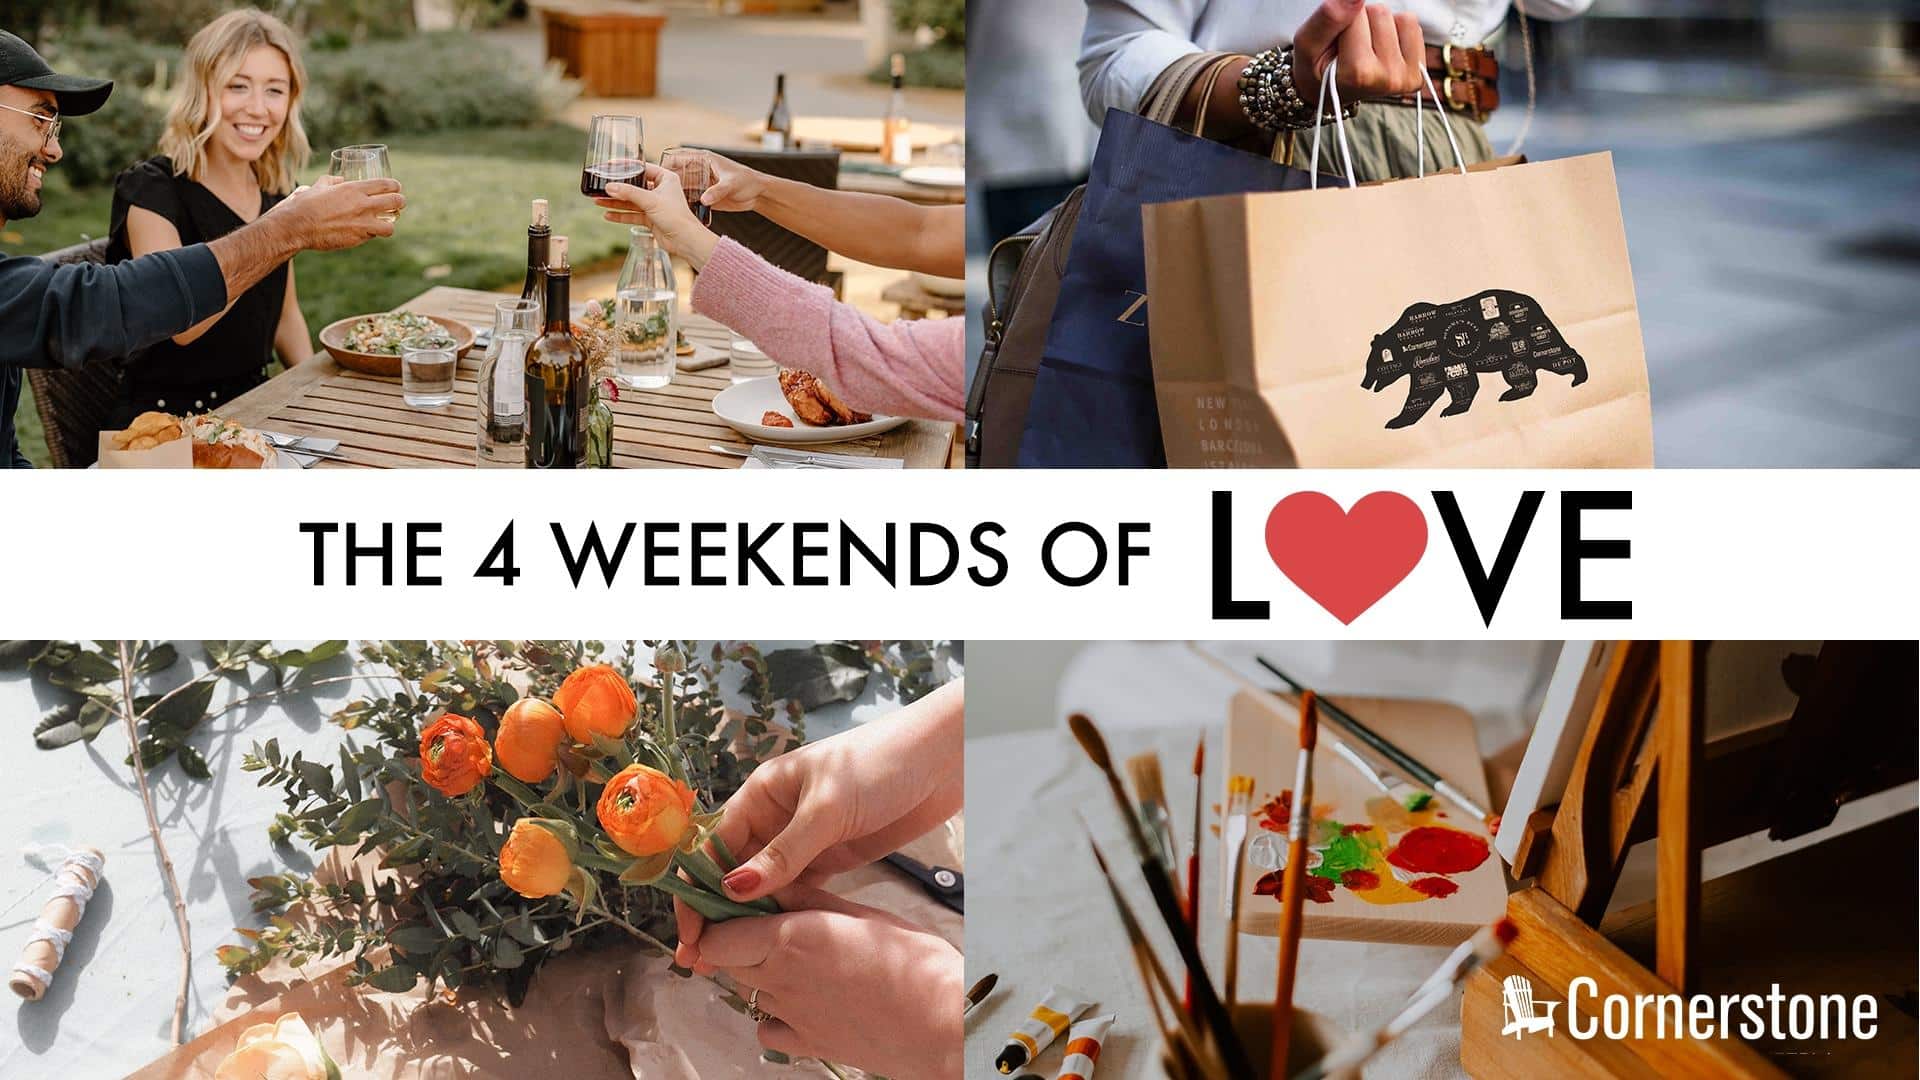 THE 4 WEEKENDS OF LOVE – For the Love of Wine & Art